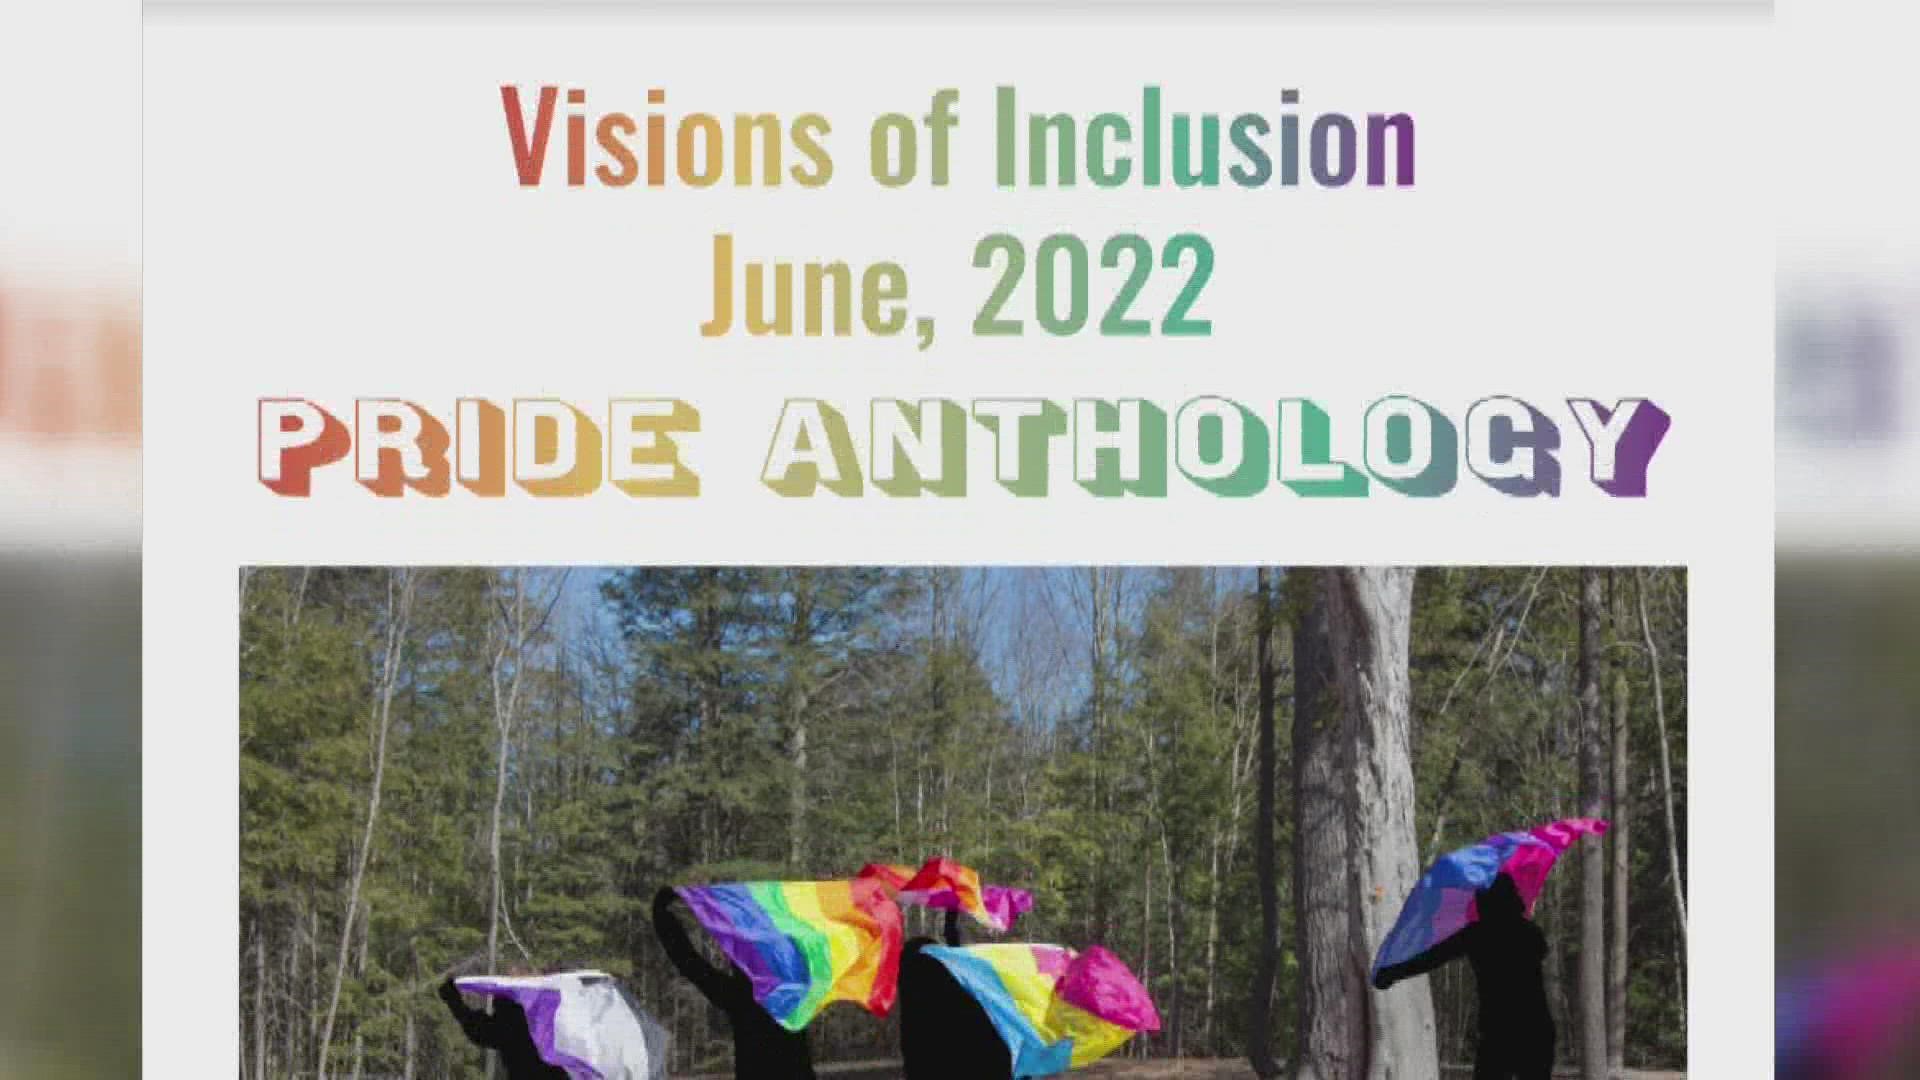 The Rockland-based organization OUT Maine put together a pride anthology called "Visions on Inclusions”.